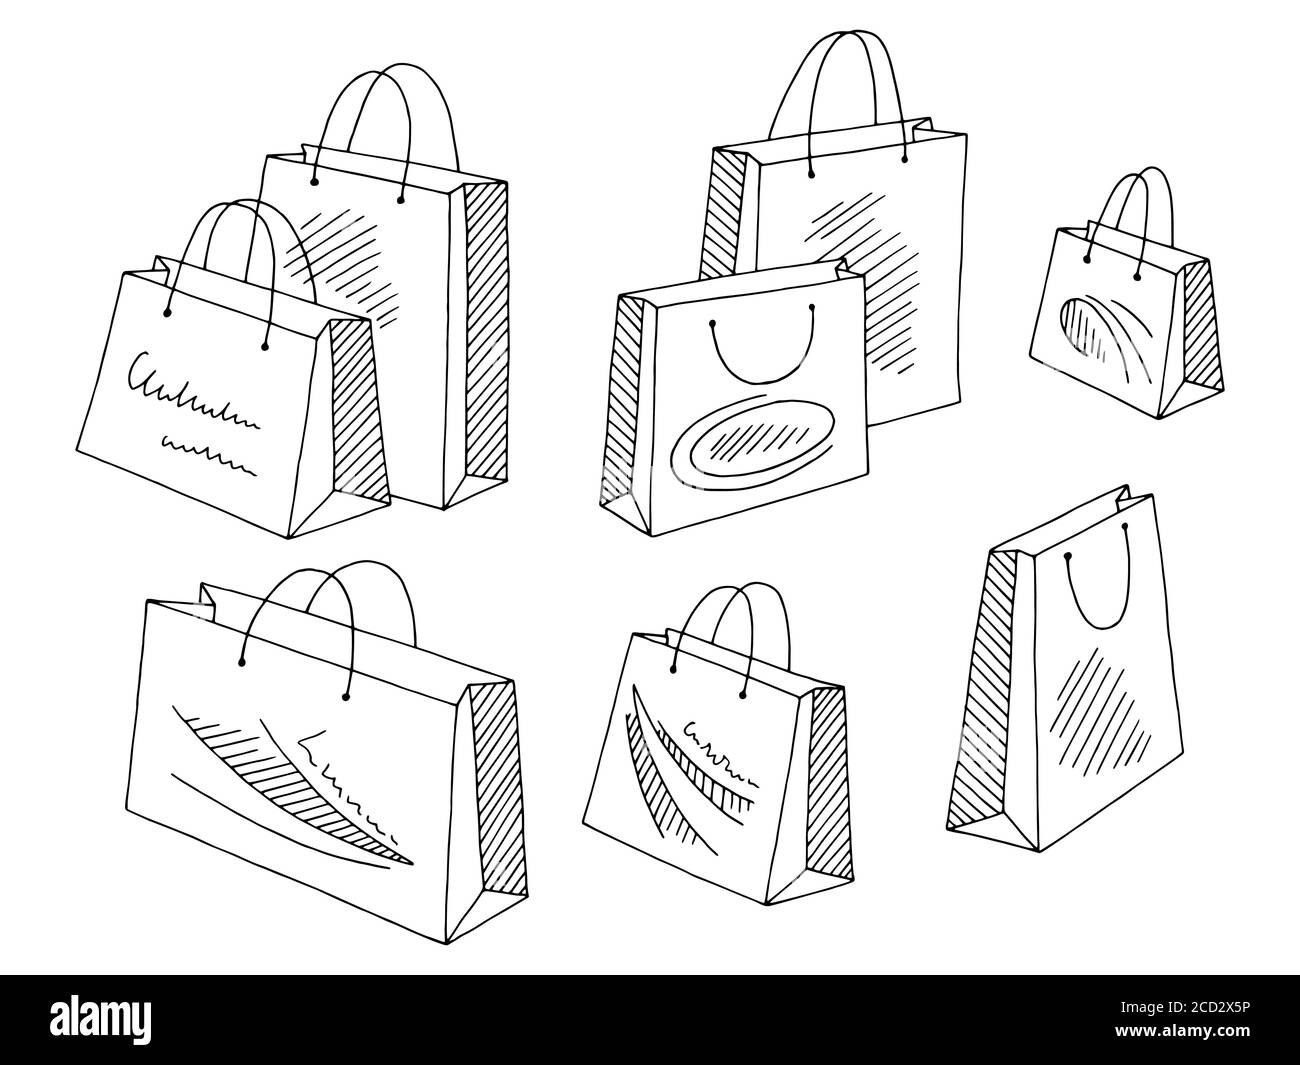 Colorful shopping bags vector illustration. Group of empty paper bags with  different colors isolated in white for shopping design elements. Stock  Vector